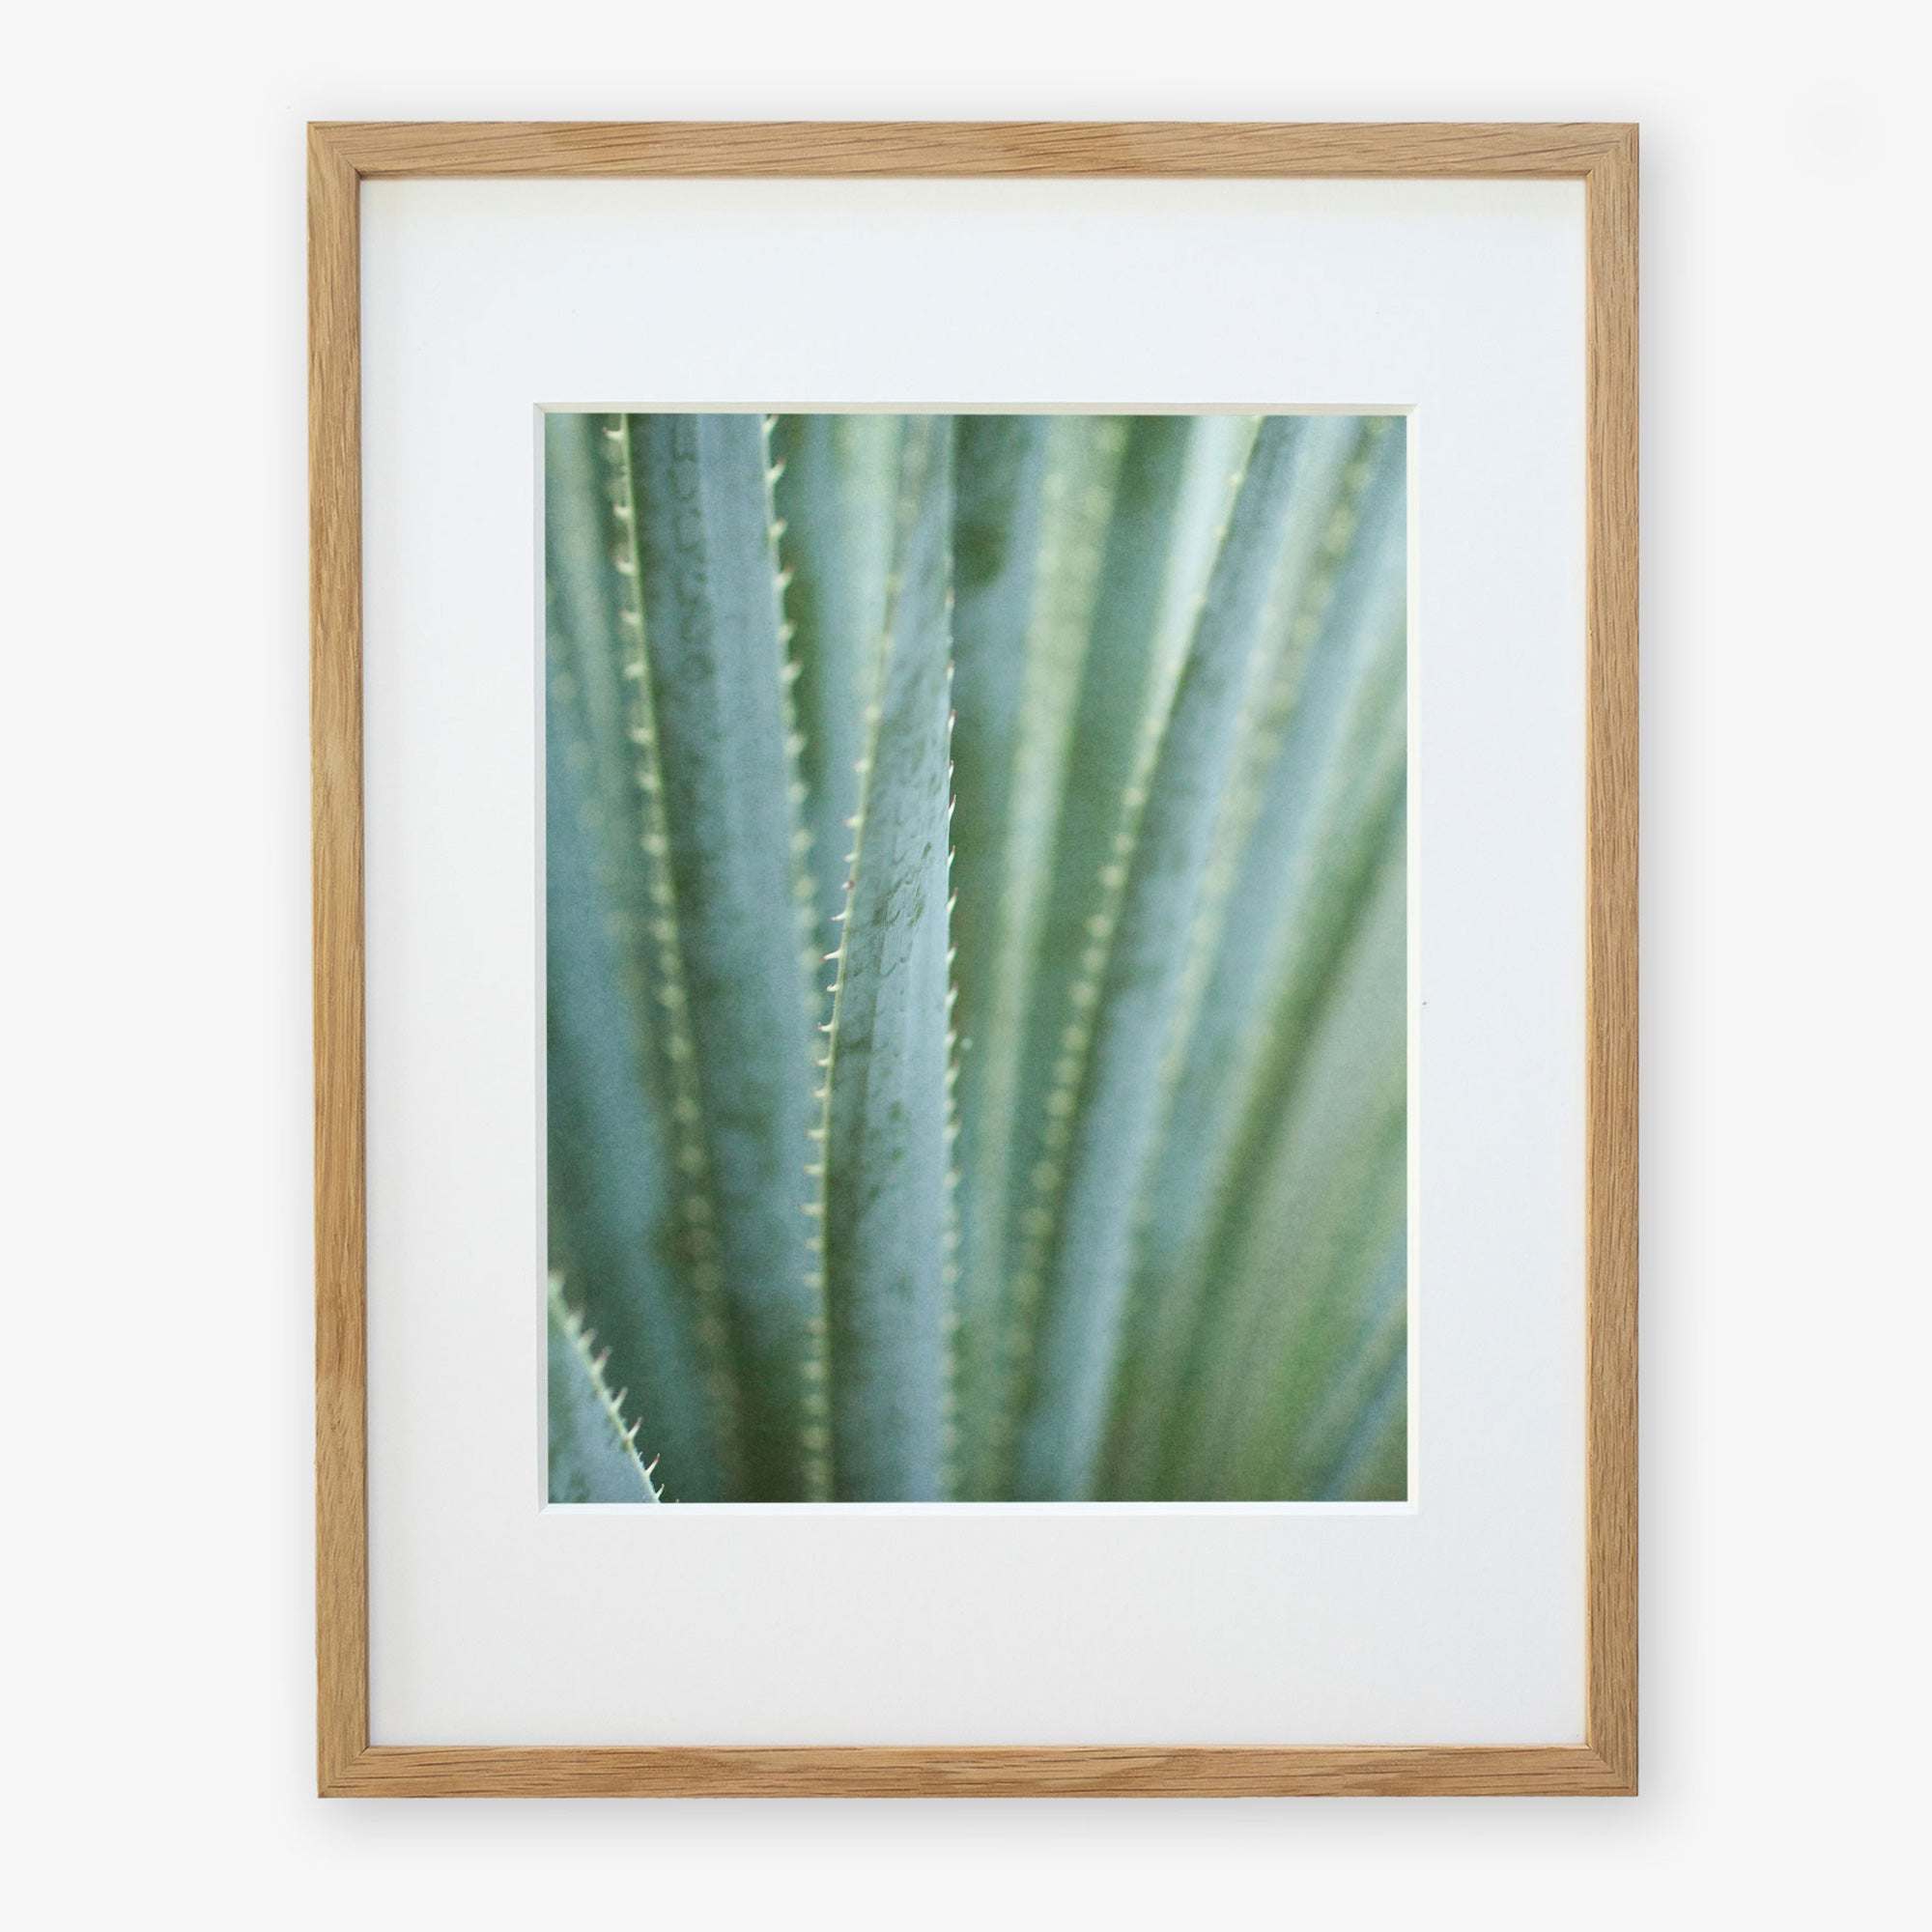 A framed photograph of the Green Botanical Print, &#39;Strands and Spikes II&#39; by Offley Green, focusing on the elongated green leaves with spiky edges, displayed in a light wooden frame against a white background and printed on archival photographic paper.